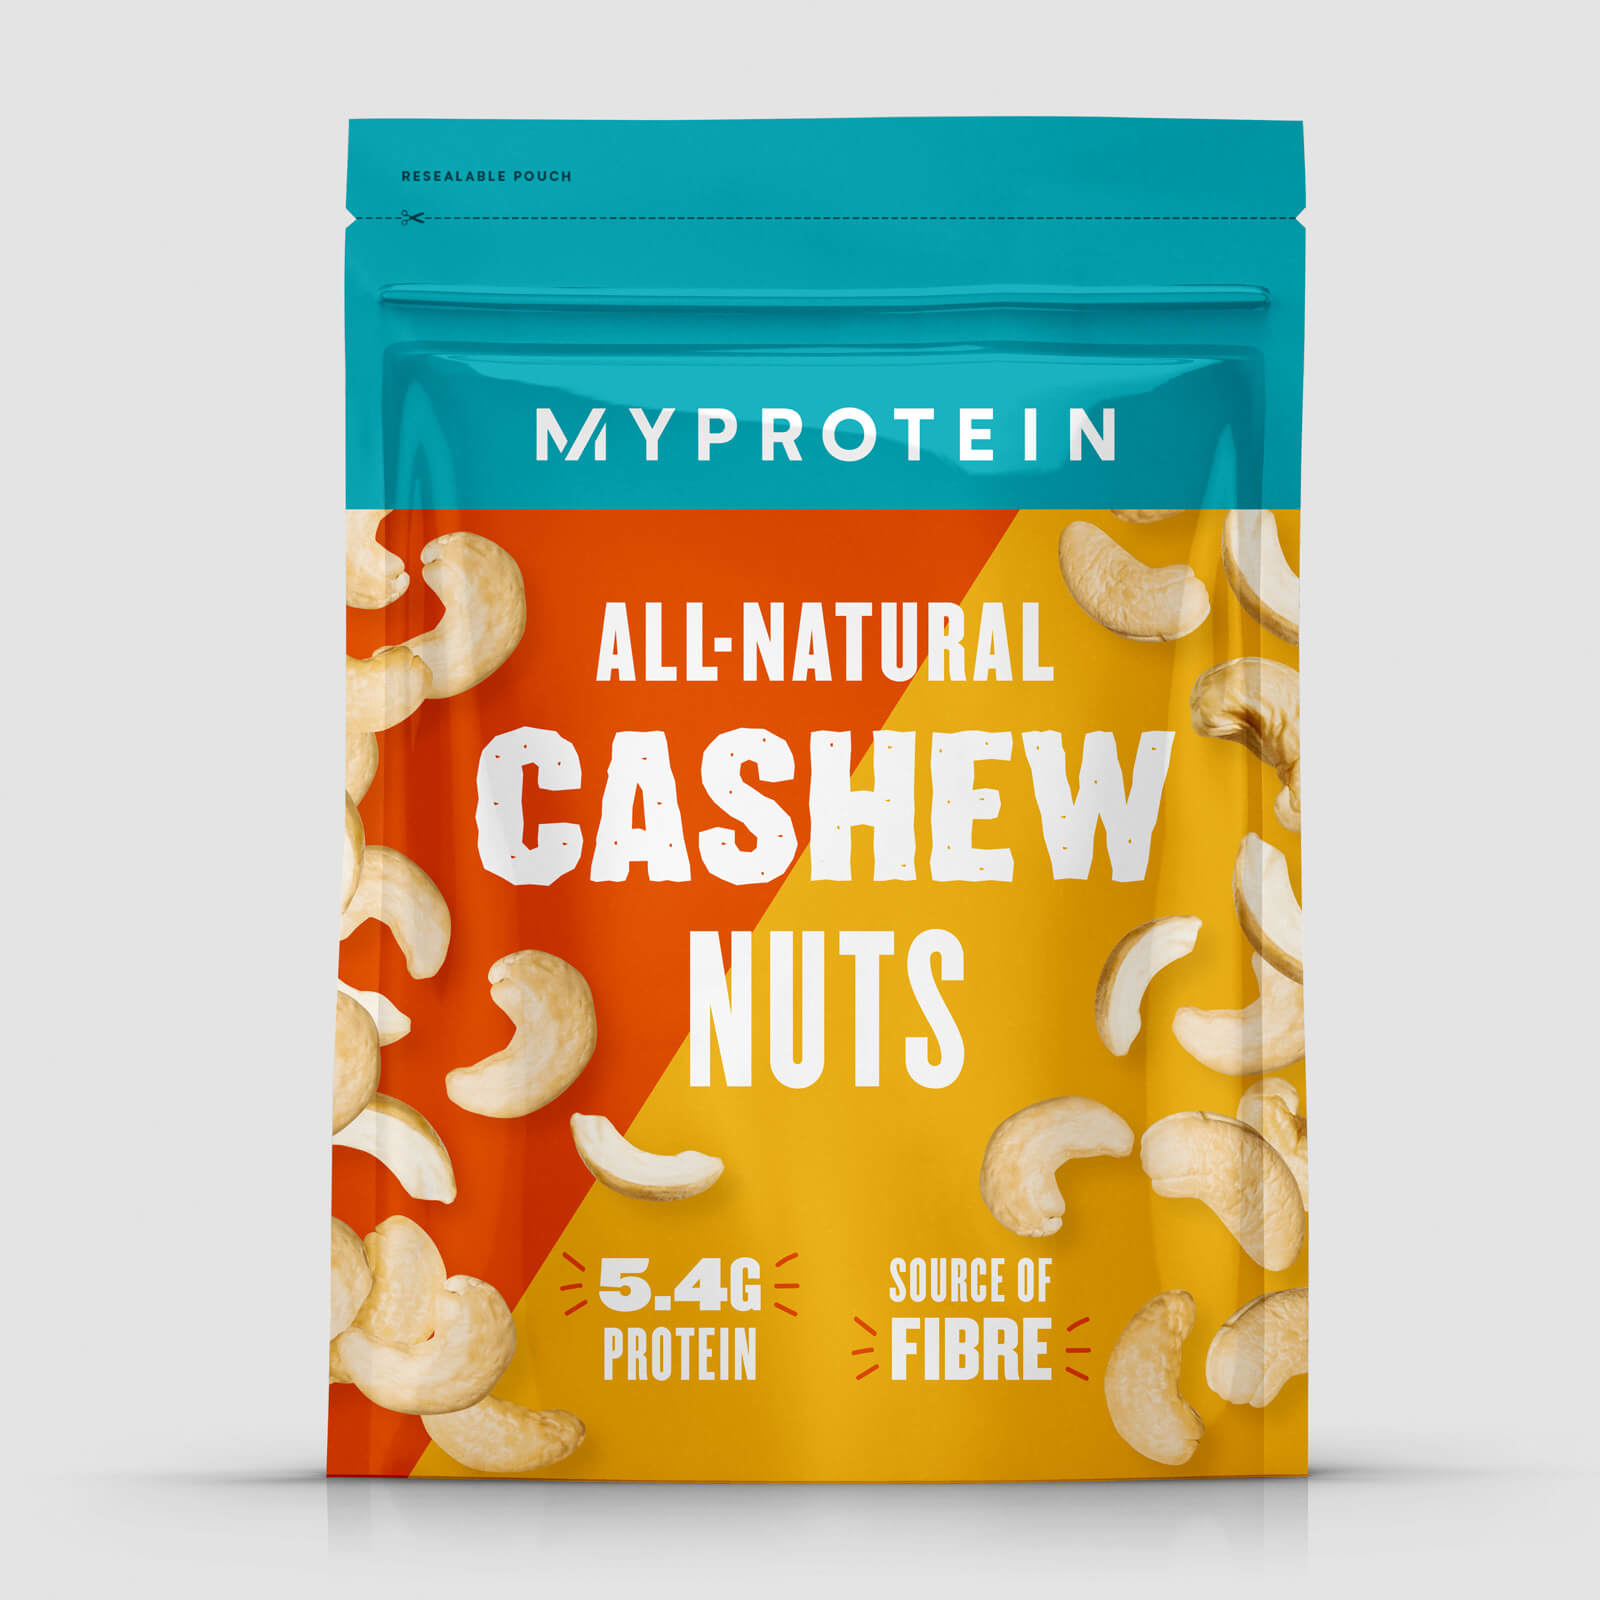 All-Natural Cashew Nuts - 400g